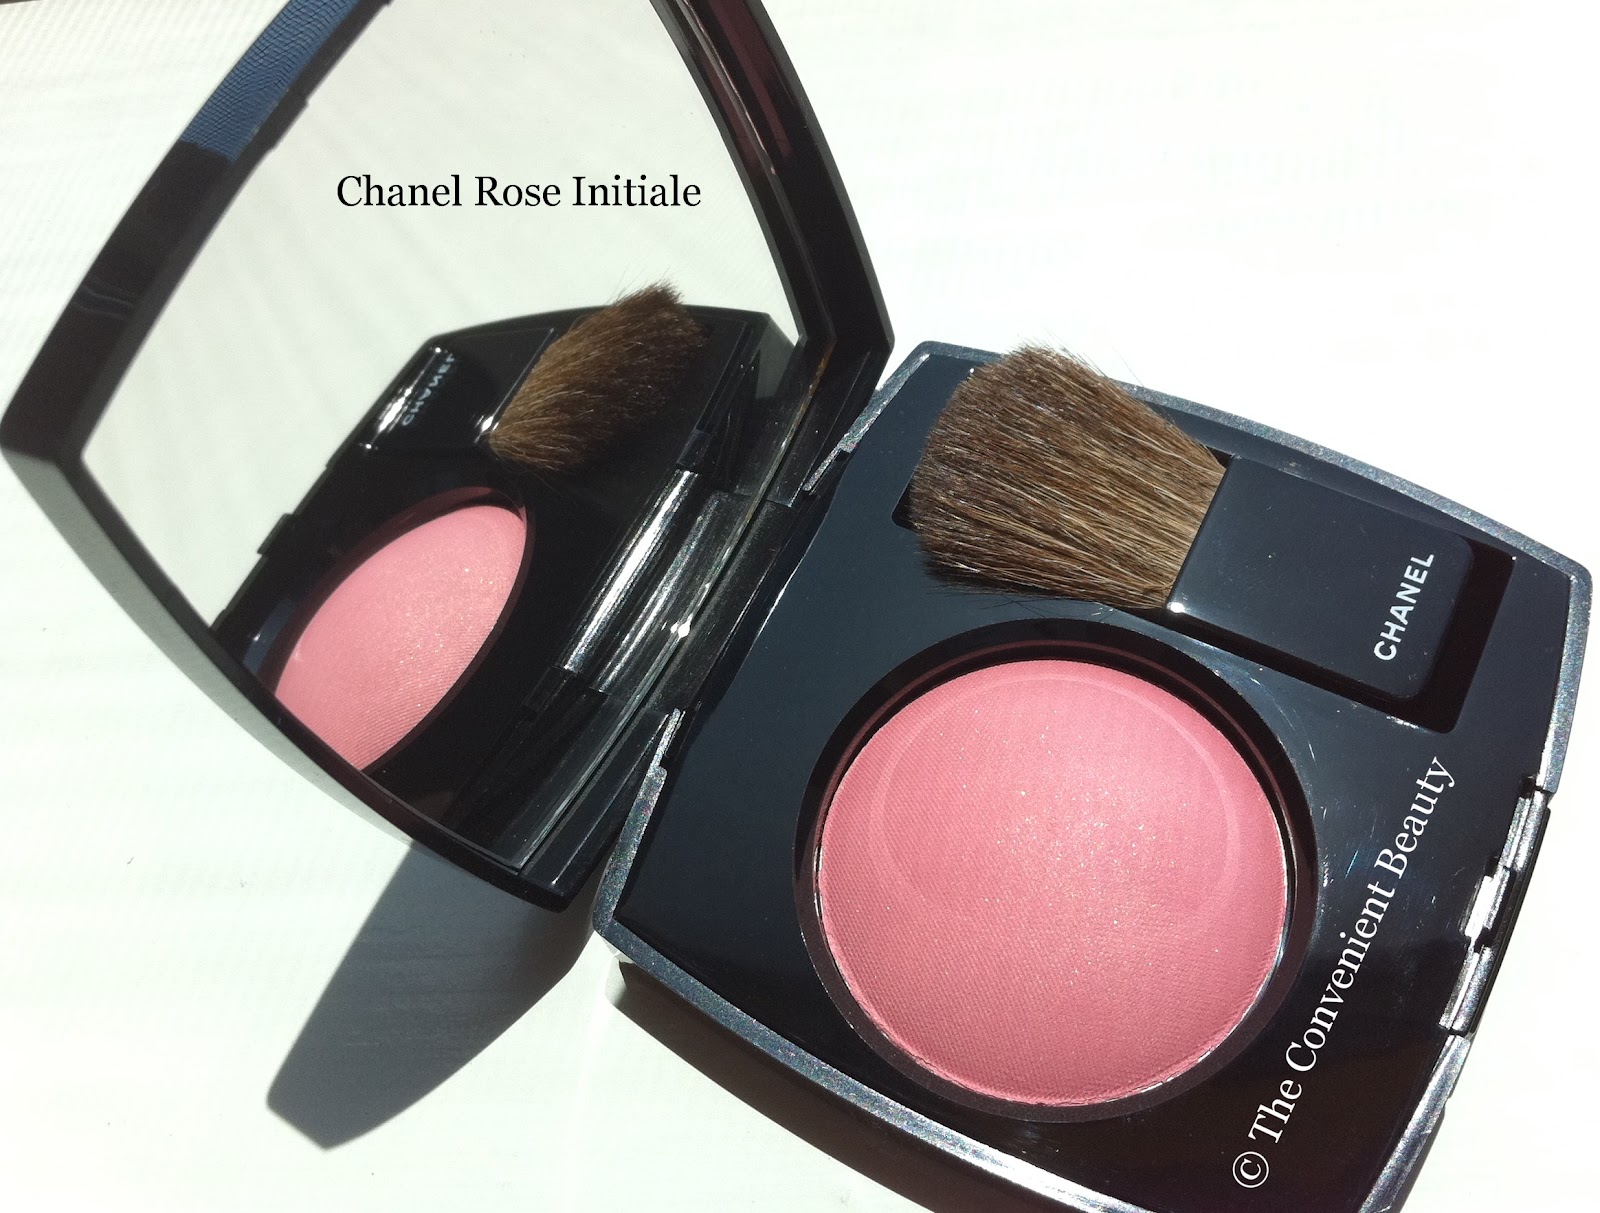 The in Fall Convenient Beauty: Joues Chanel Contraste Rose 2012 Review: Initiale